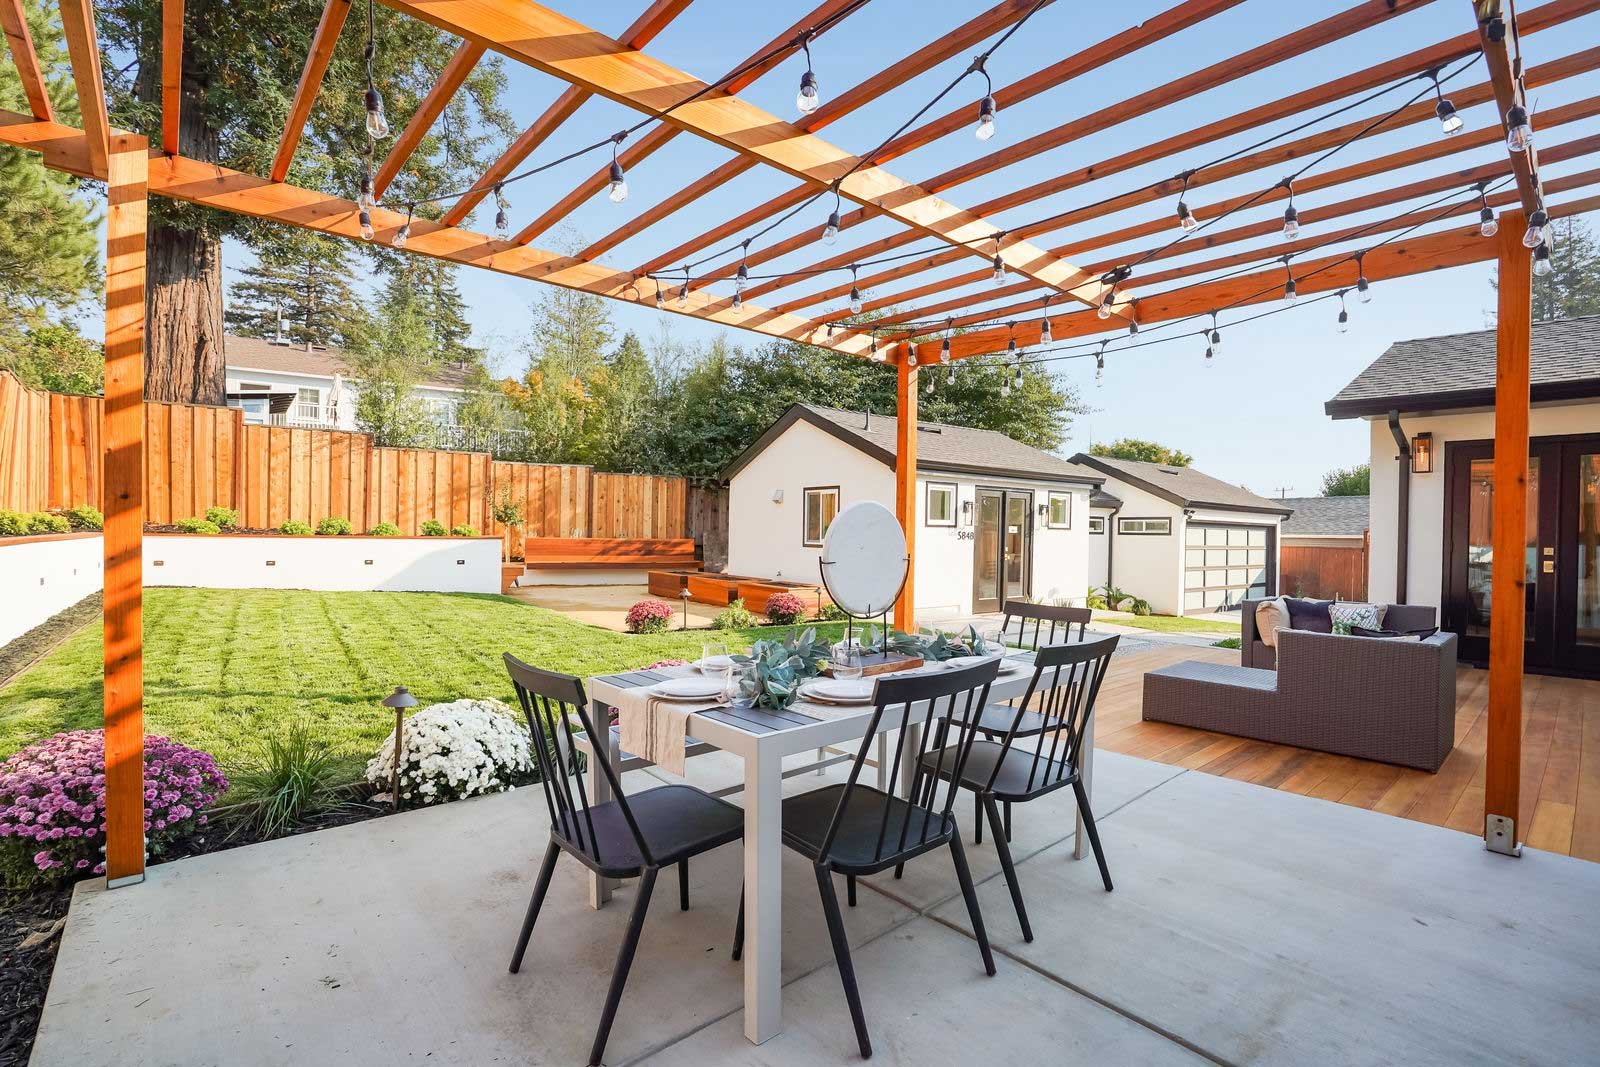 A wooden fenced yard with a patio, outdoor dining, rattan garden sofa and decorative plants.